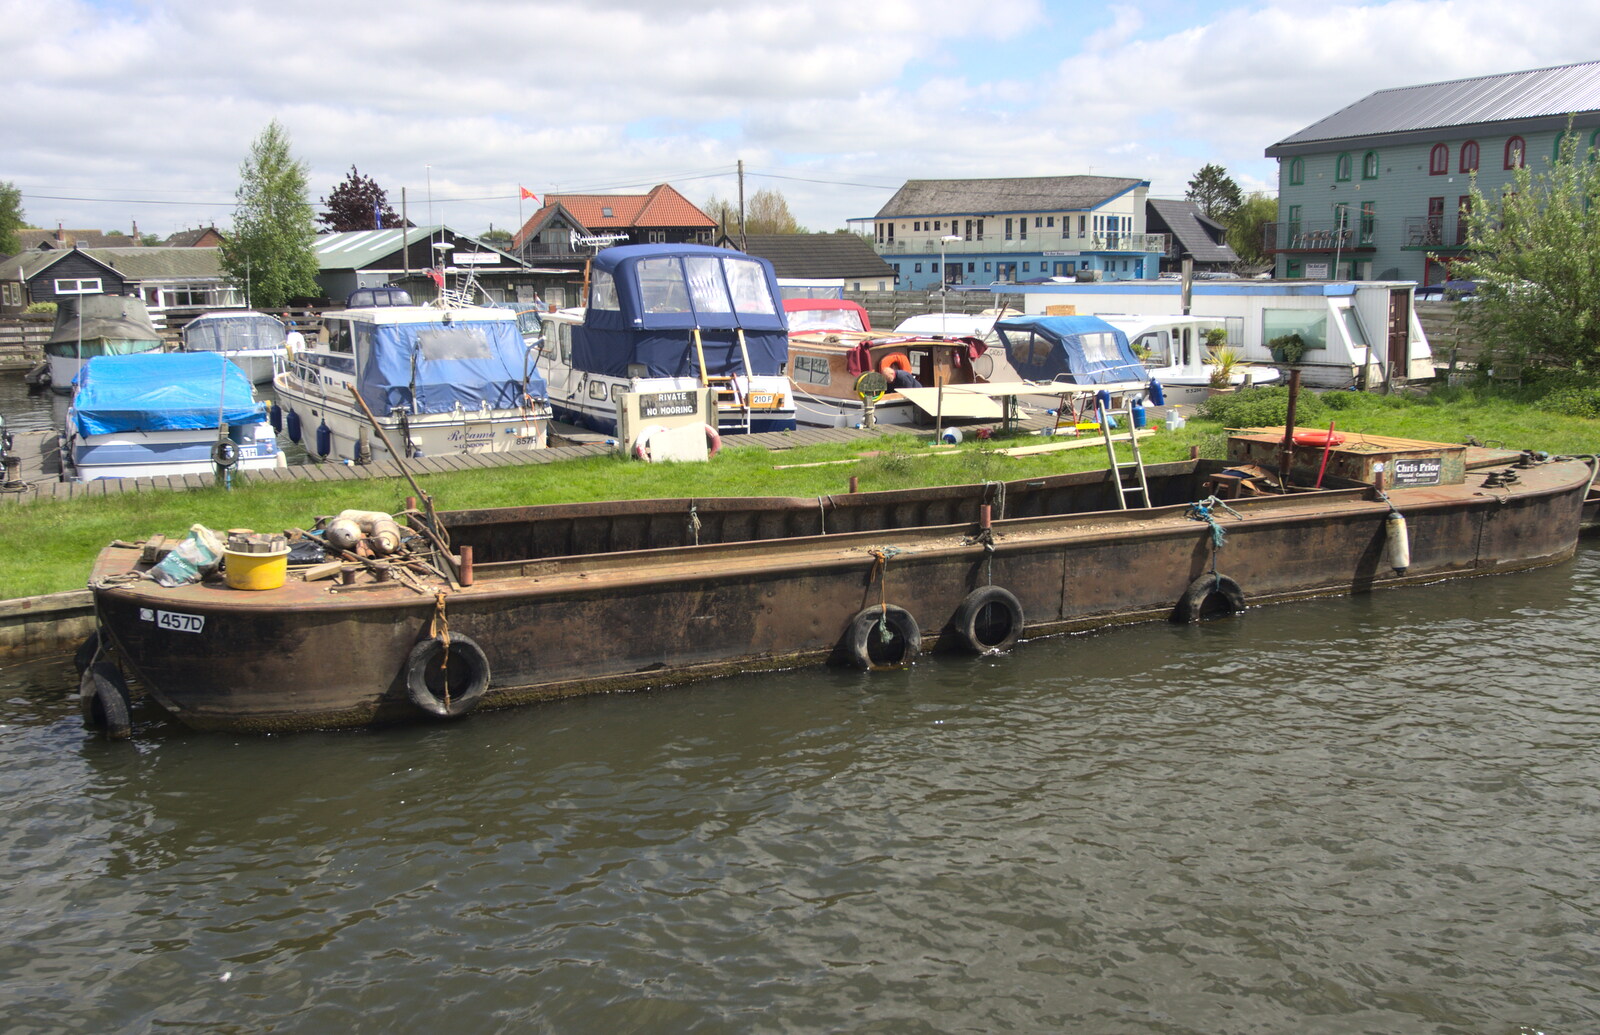 A rusting hulk on the riverbank from A Trip on the Norfolk Broads, Wroxham, Norfolk - 25th May 2013